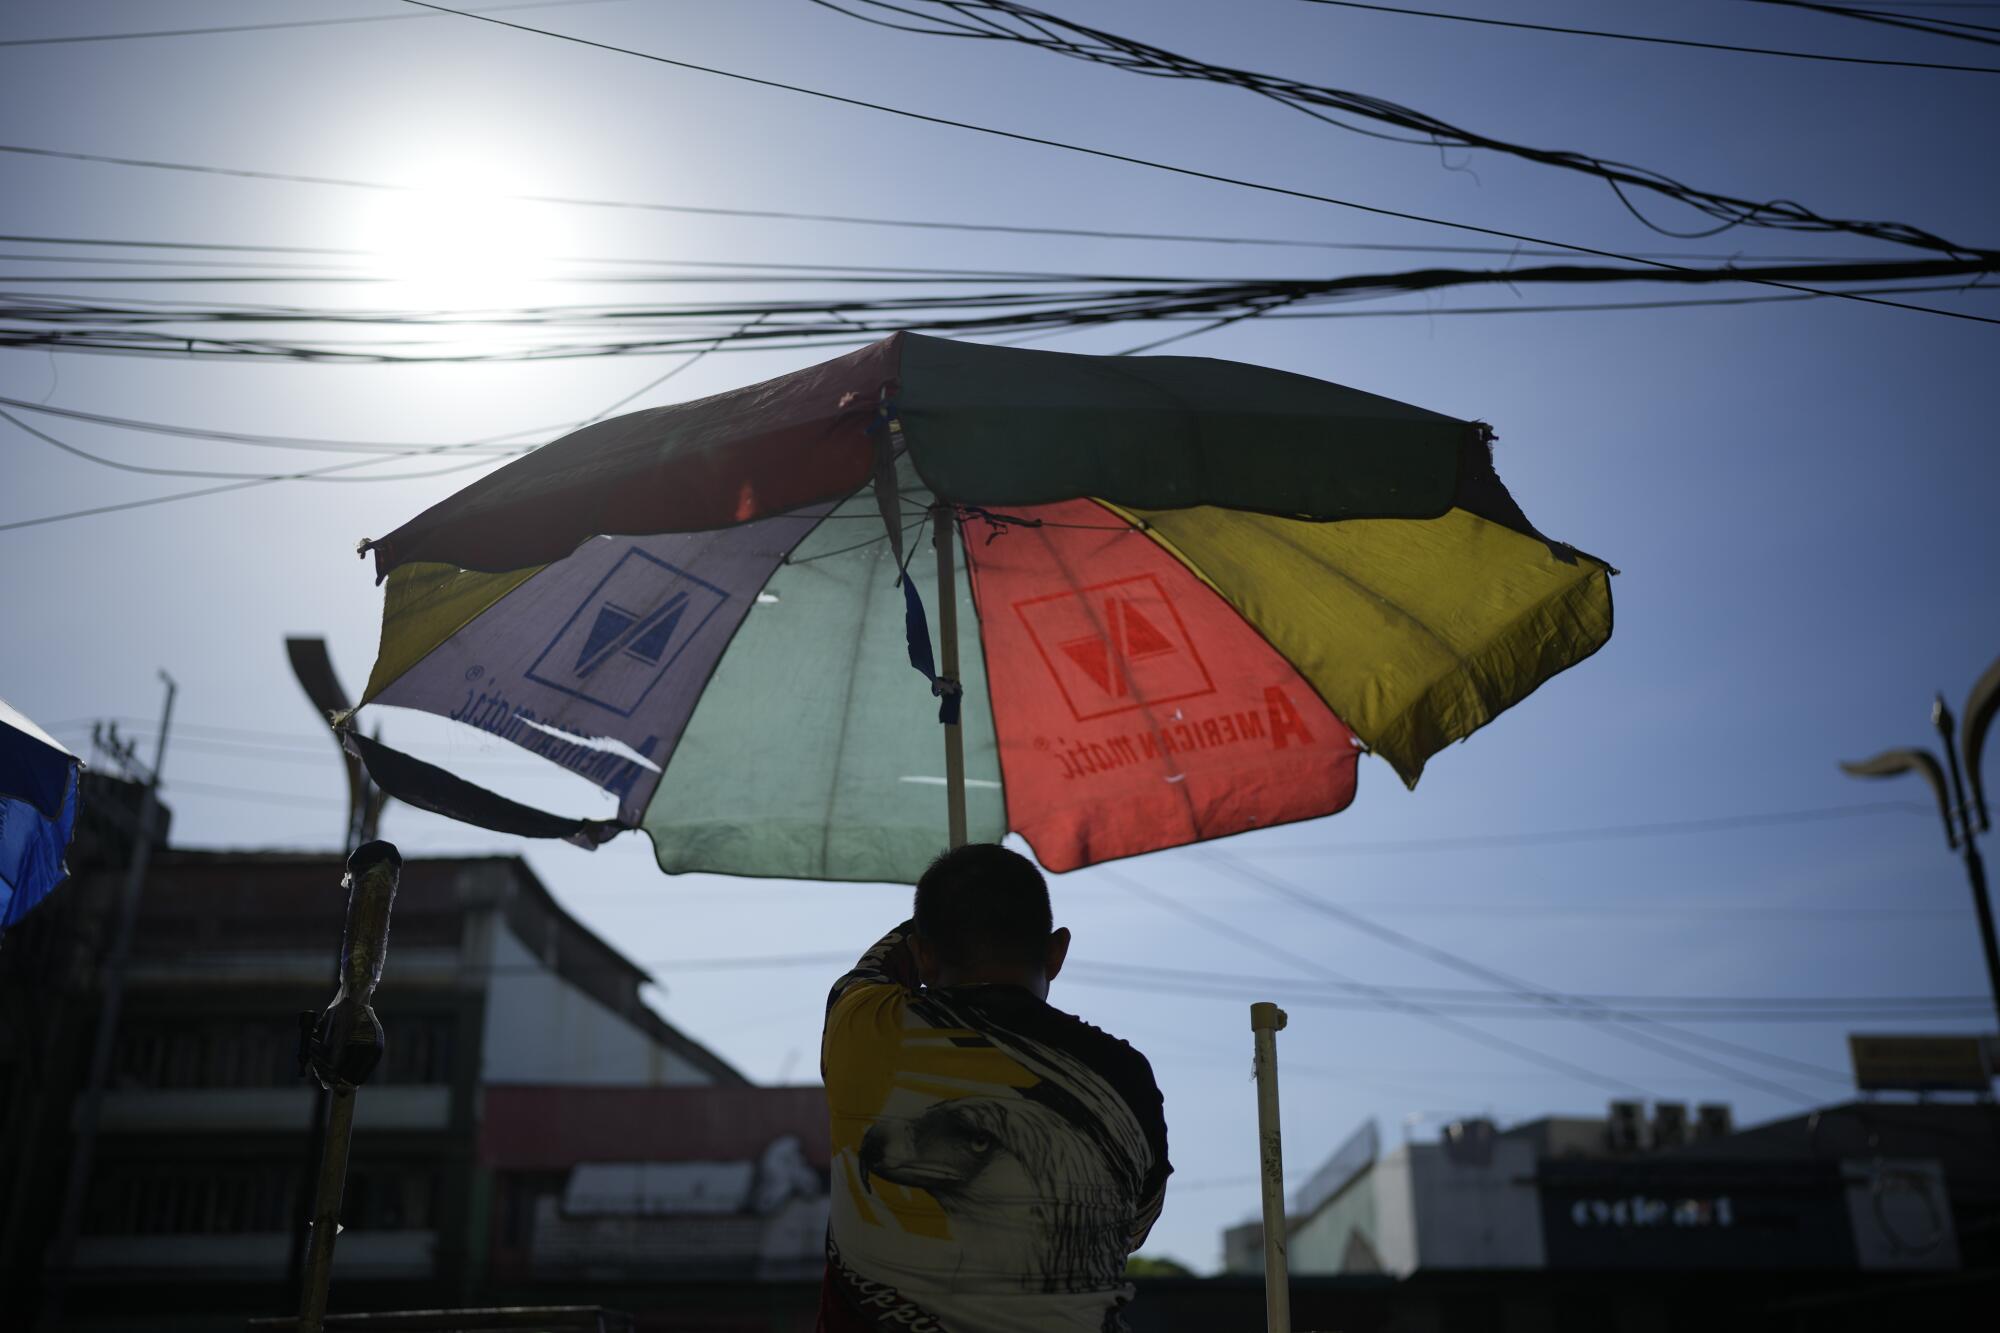 A vendor in Manila seeks shade from the sun. Southeast Asia has been gripped by an extreme heat wave.